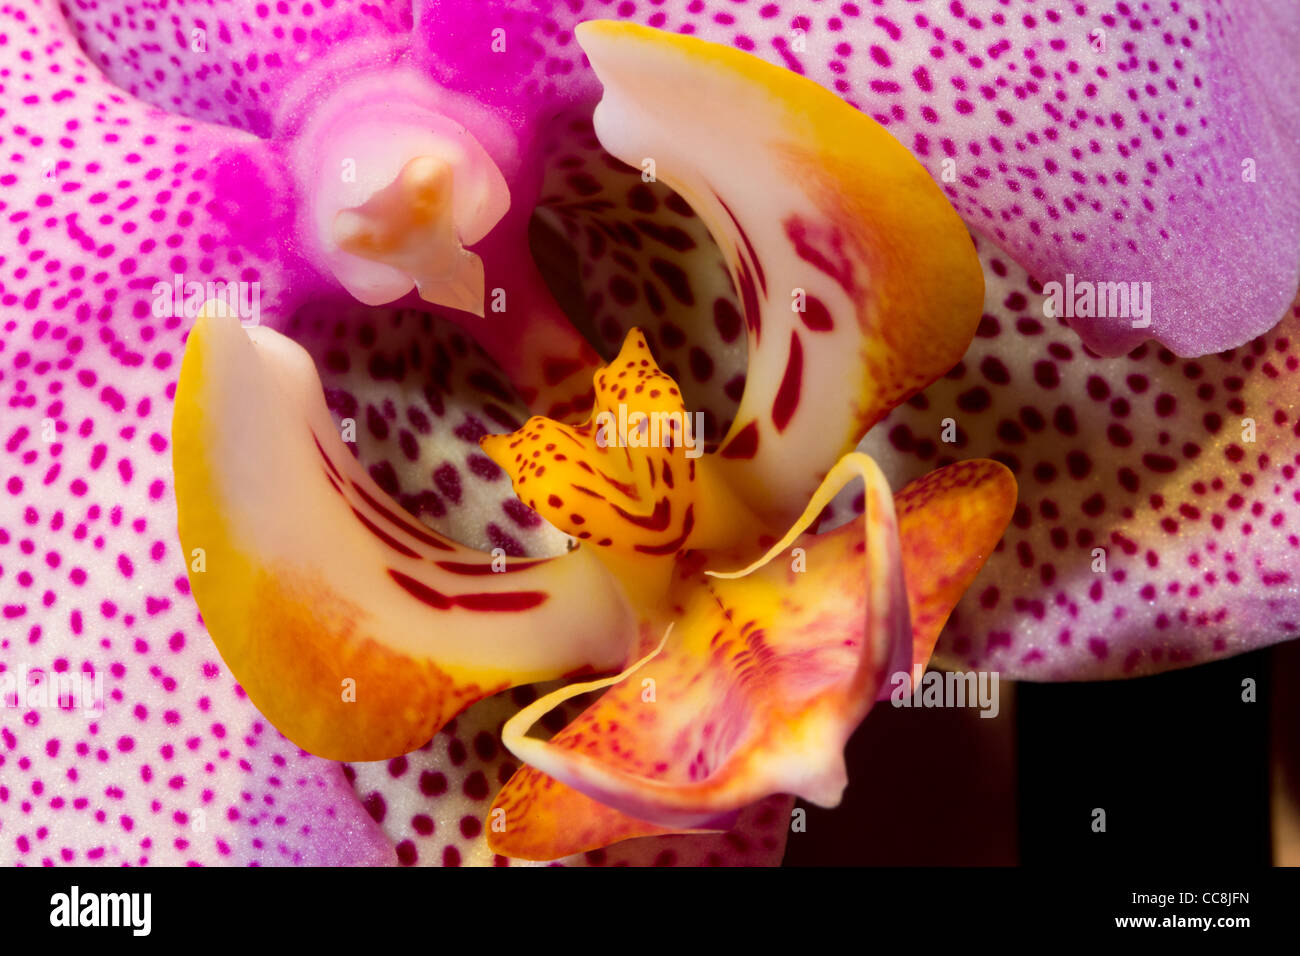 A pink Orchid or Orchidaceae Stock Photo